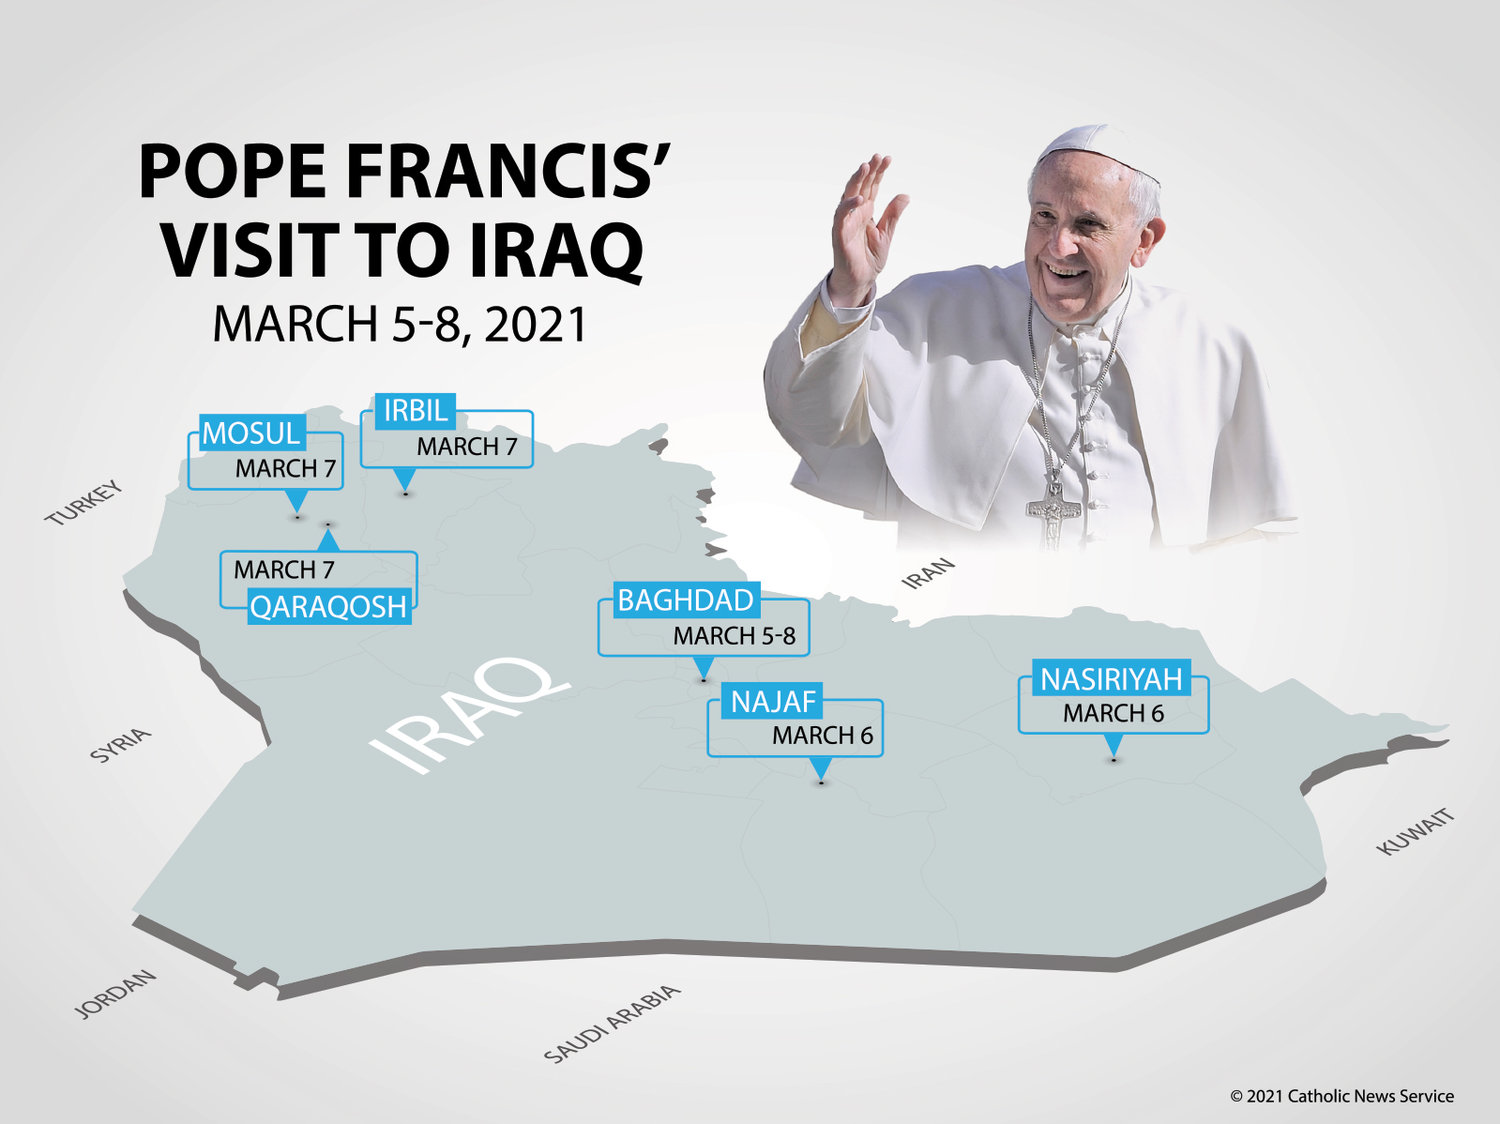 PAPAL TRAVELS—Pope Francis is scheduled to visit six cities during his March 5-8 visit to Iraq.